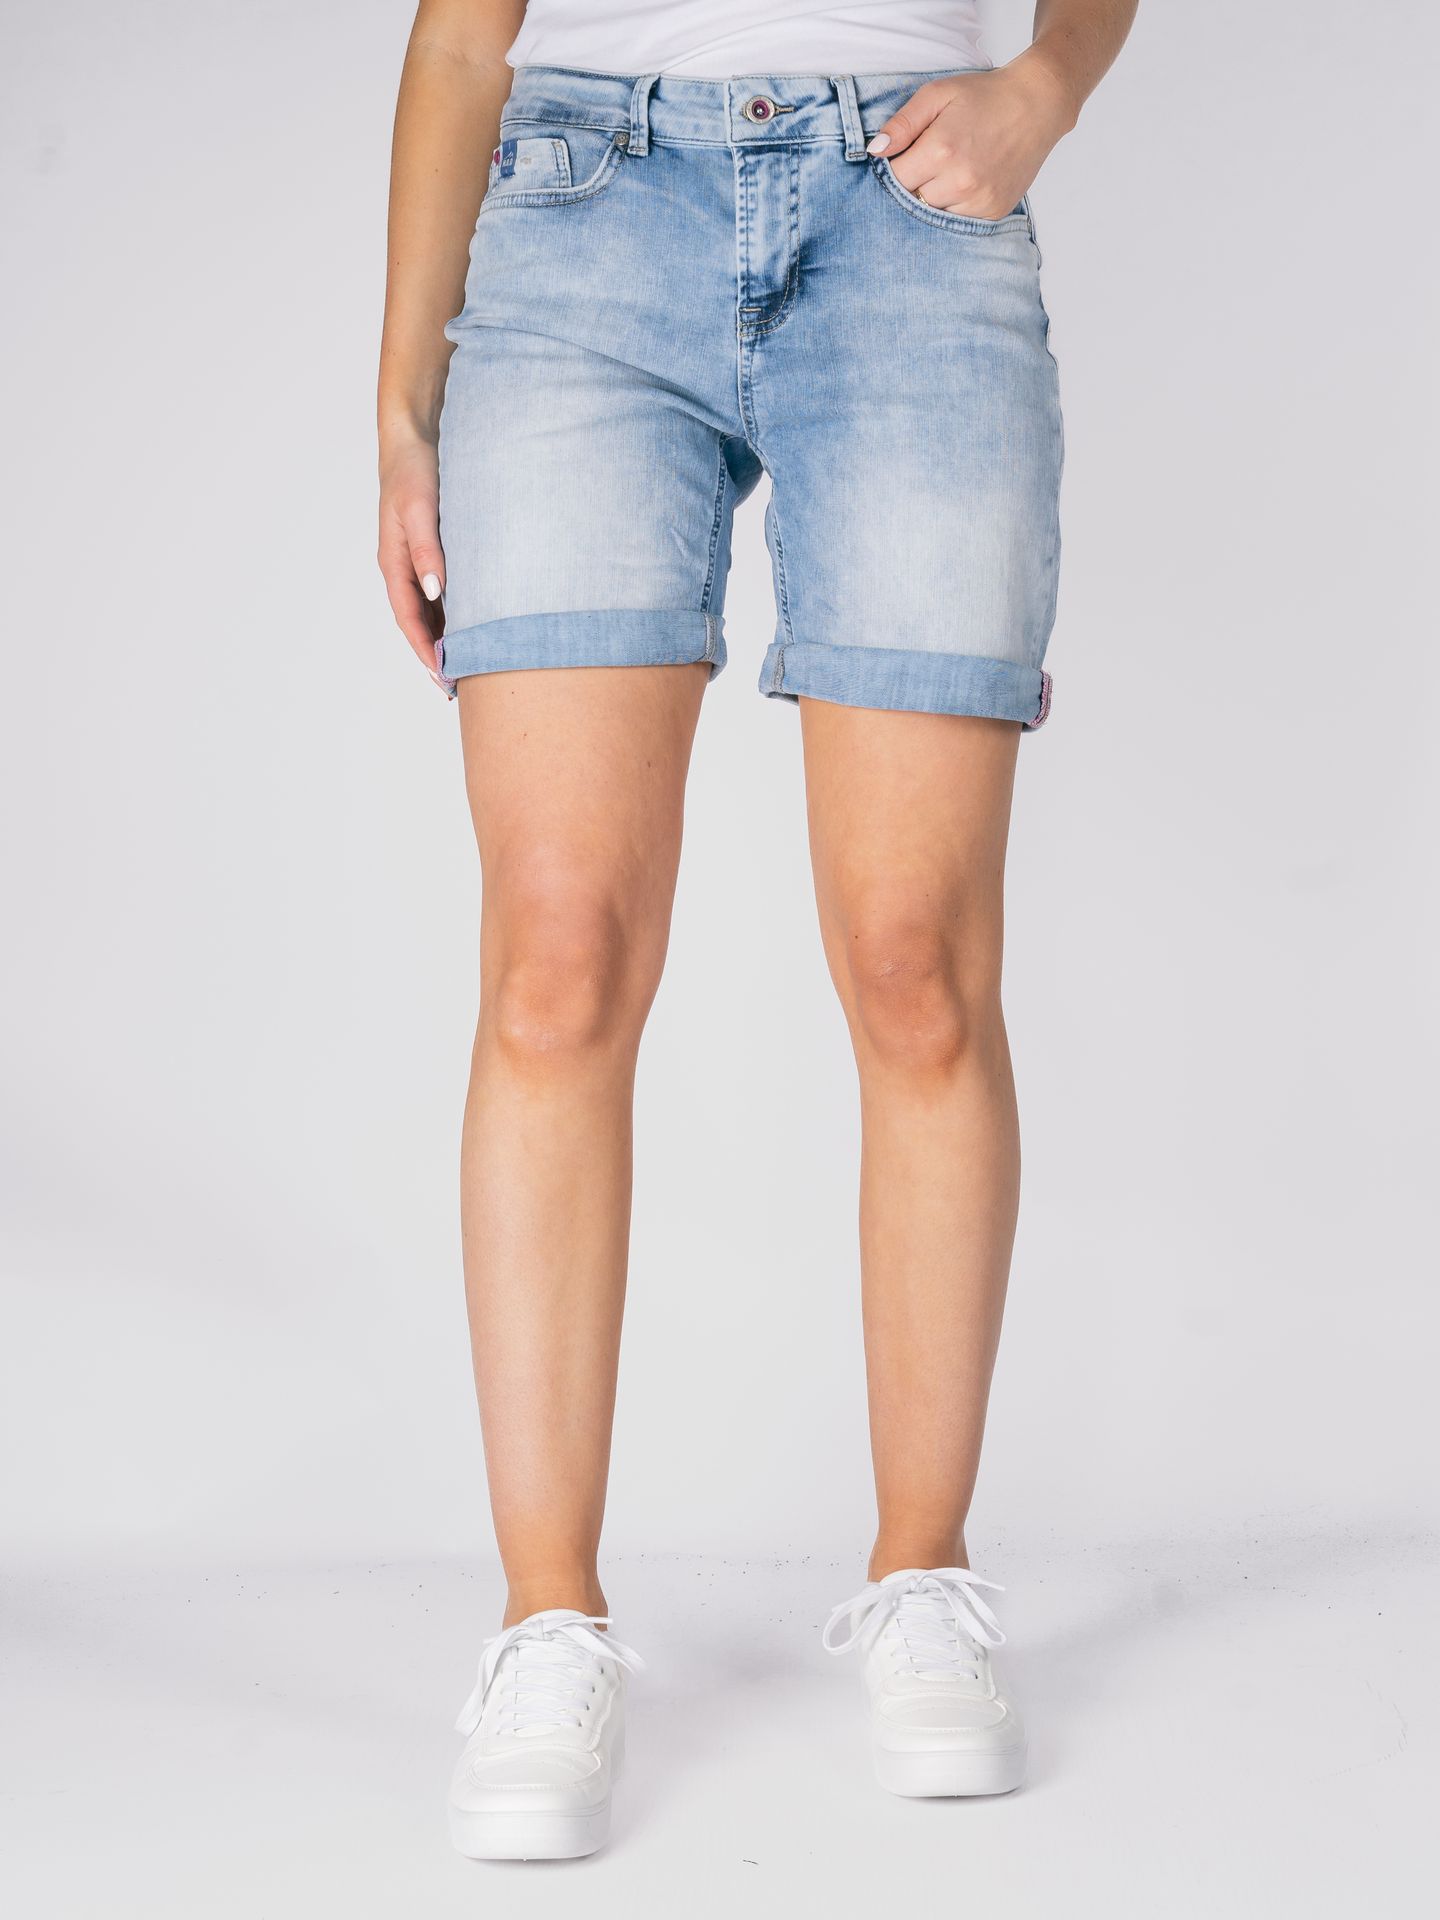 Miracle of Denim Lucky shorts 3938 Airport blue 2900148019064